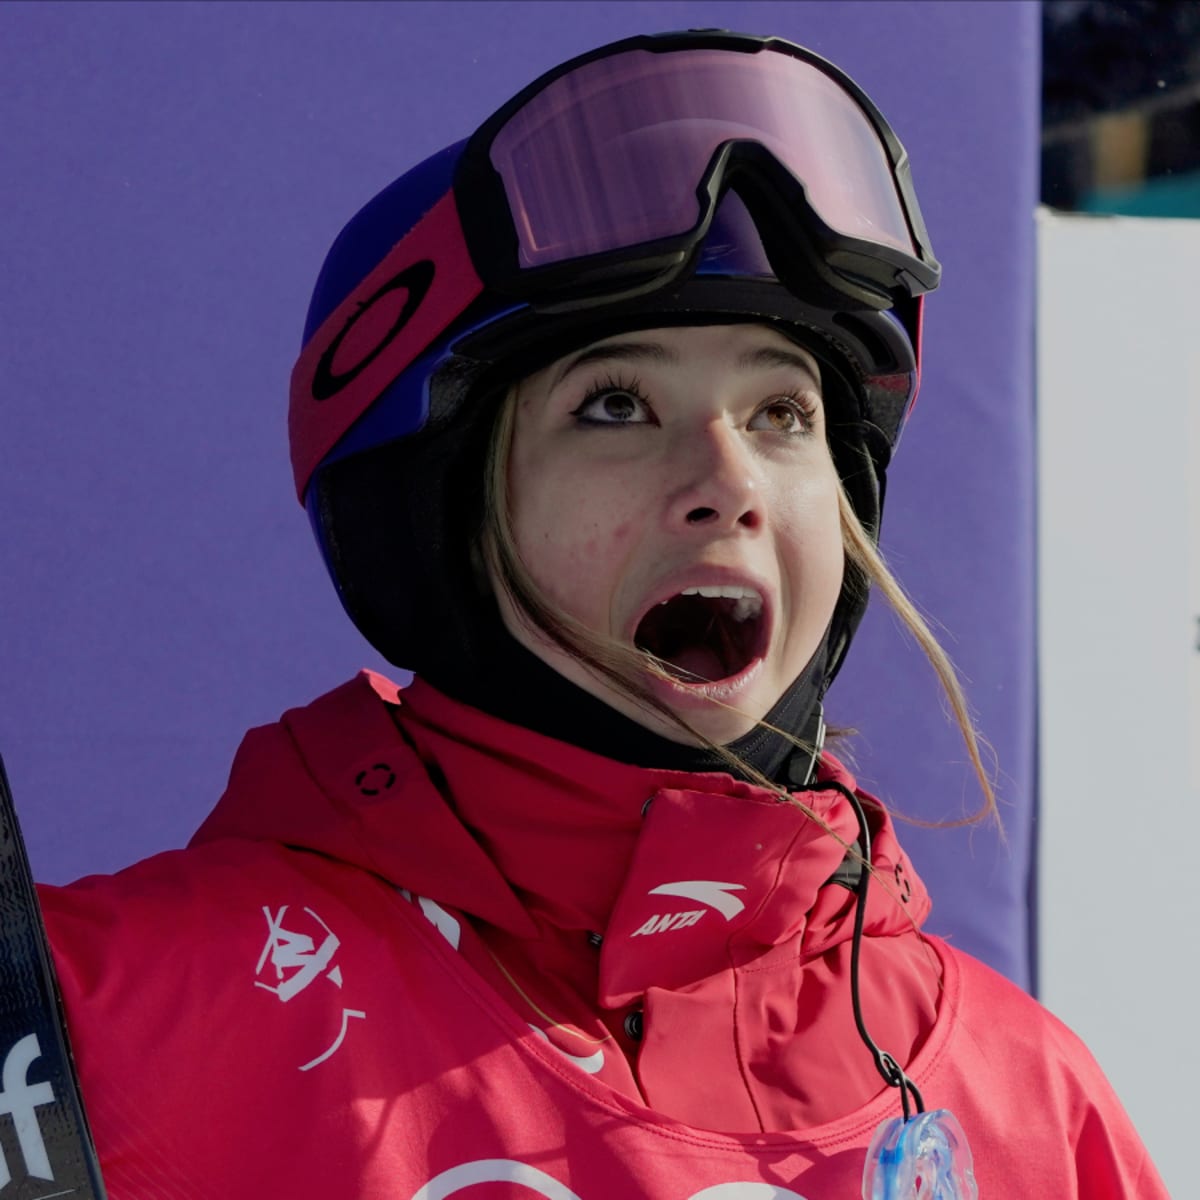 Eileen Gu Wins Gold in First-Ever Olympic Big Air Freeski With